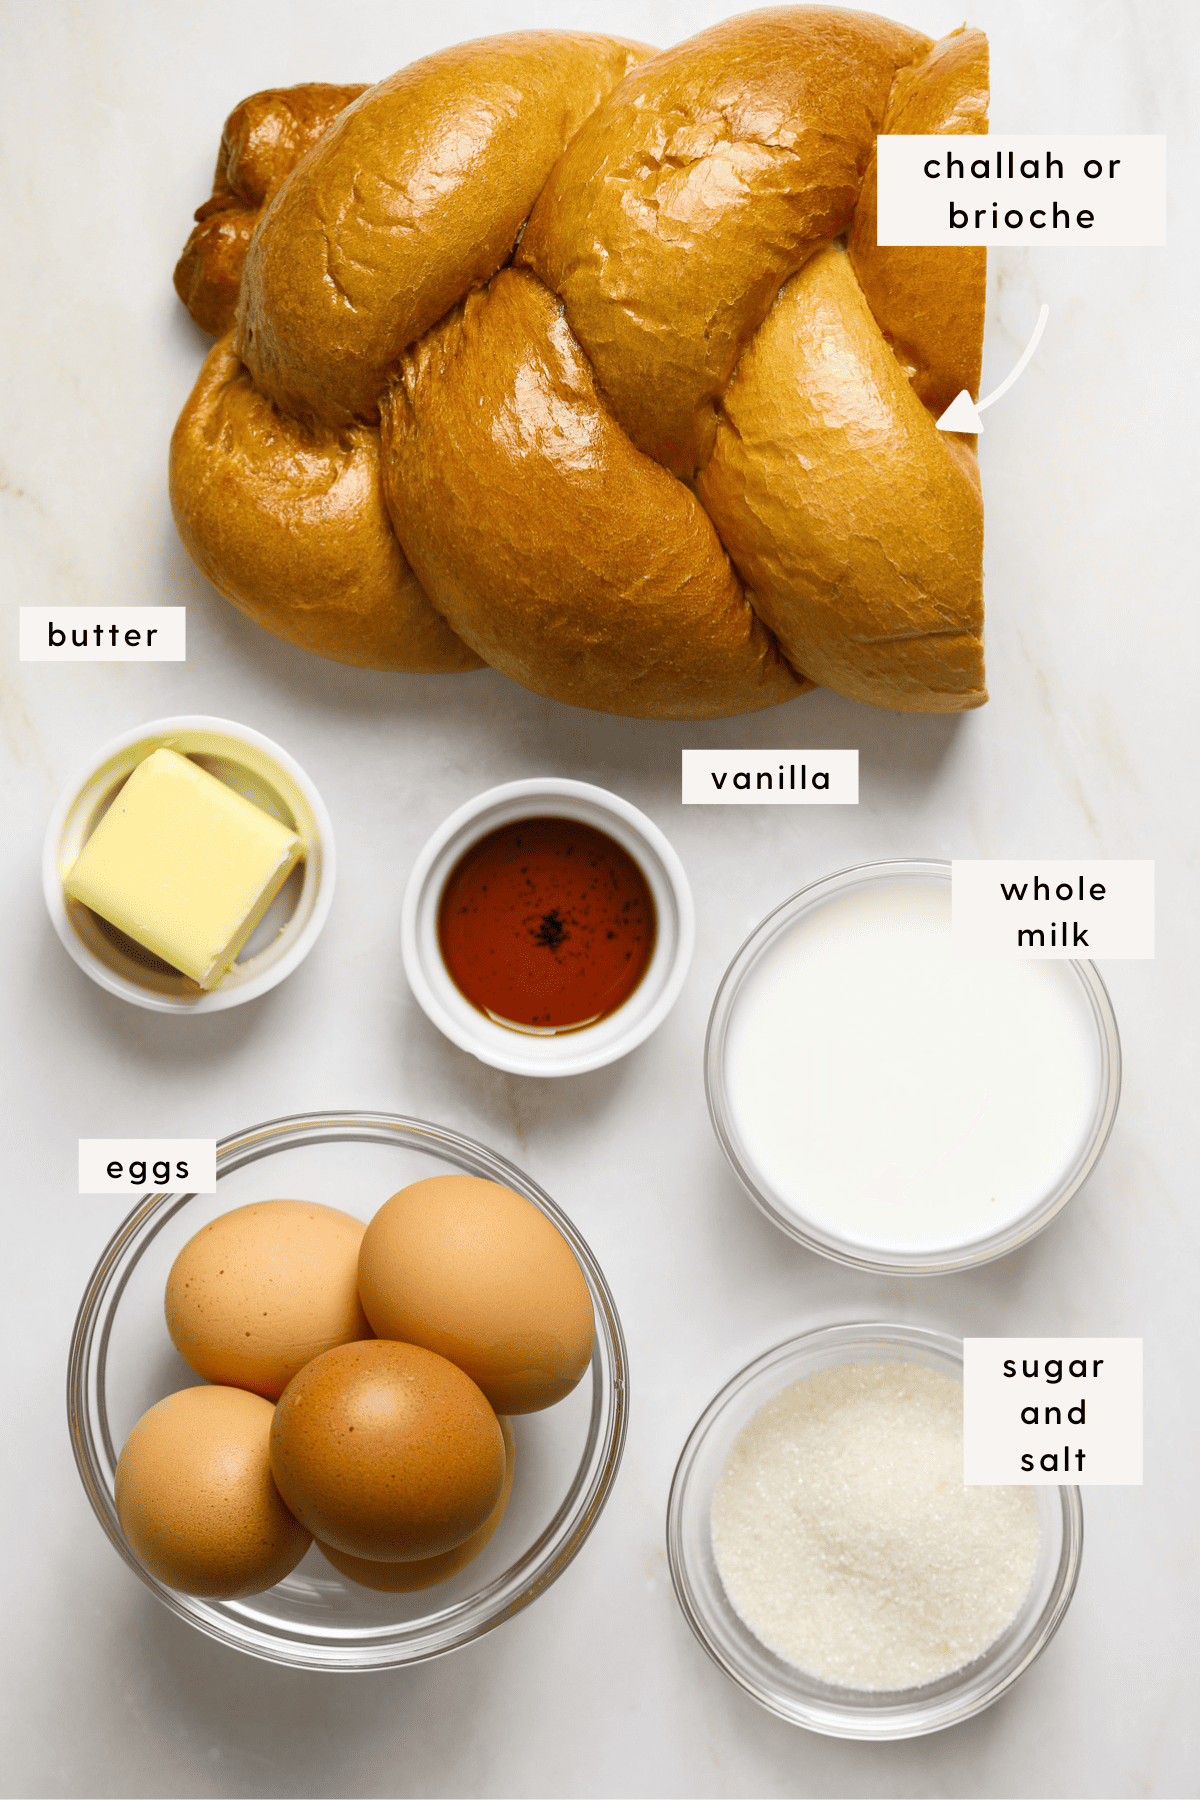 A half loaf of challah, brown eggs in a small glass bowl, sugar, whole milk and vanilla extract.